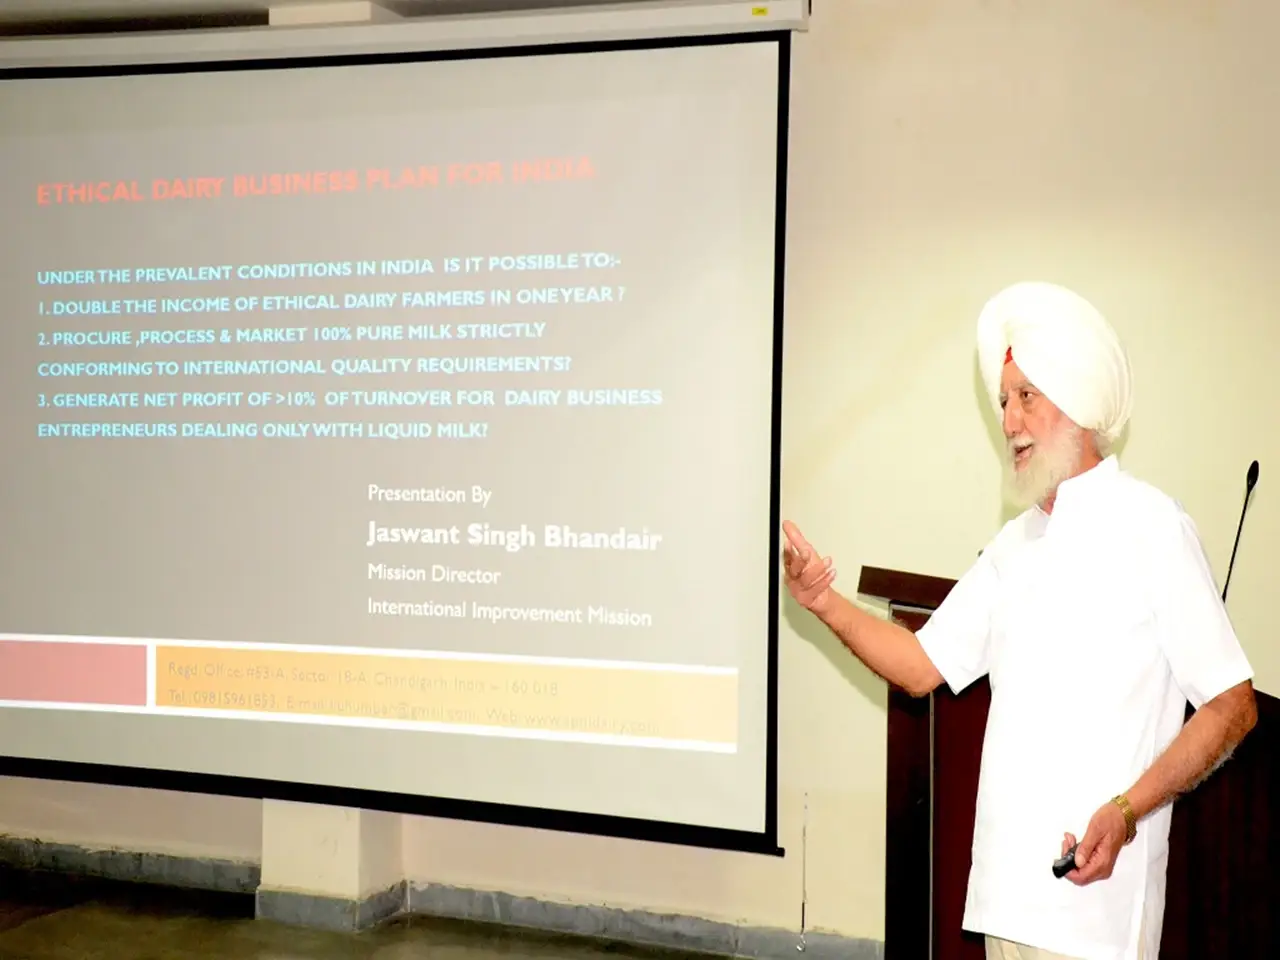 Jaswant Singh Bhandair gave a lecture on “Ethical Dairy Business Plan for India”